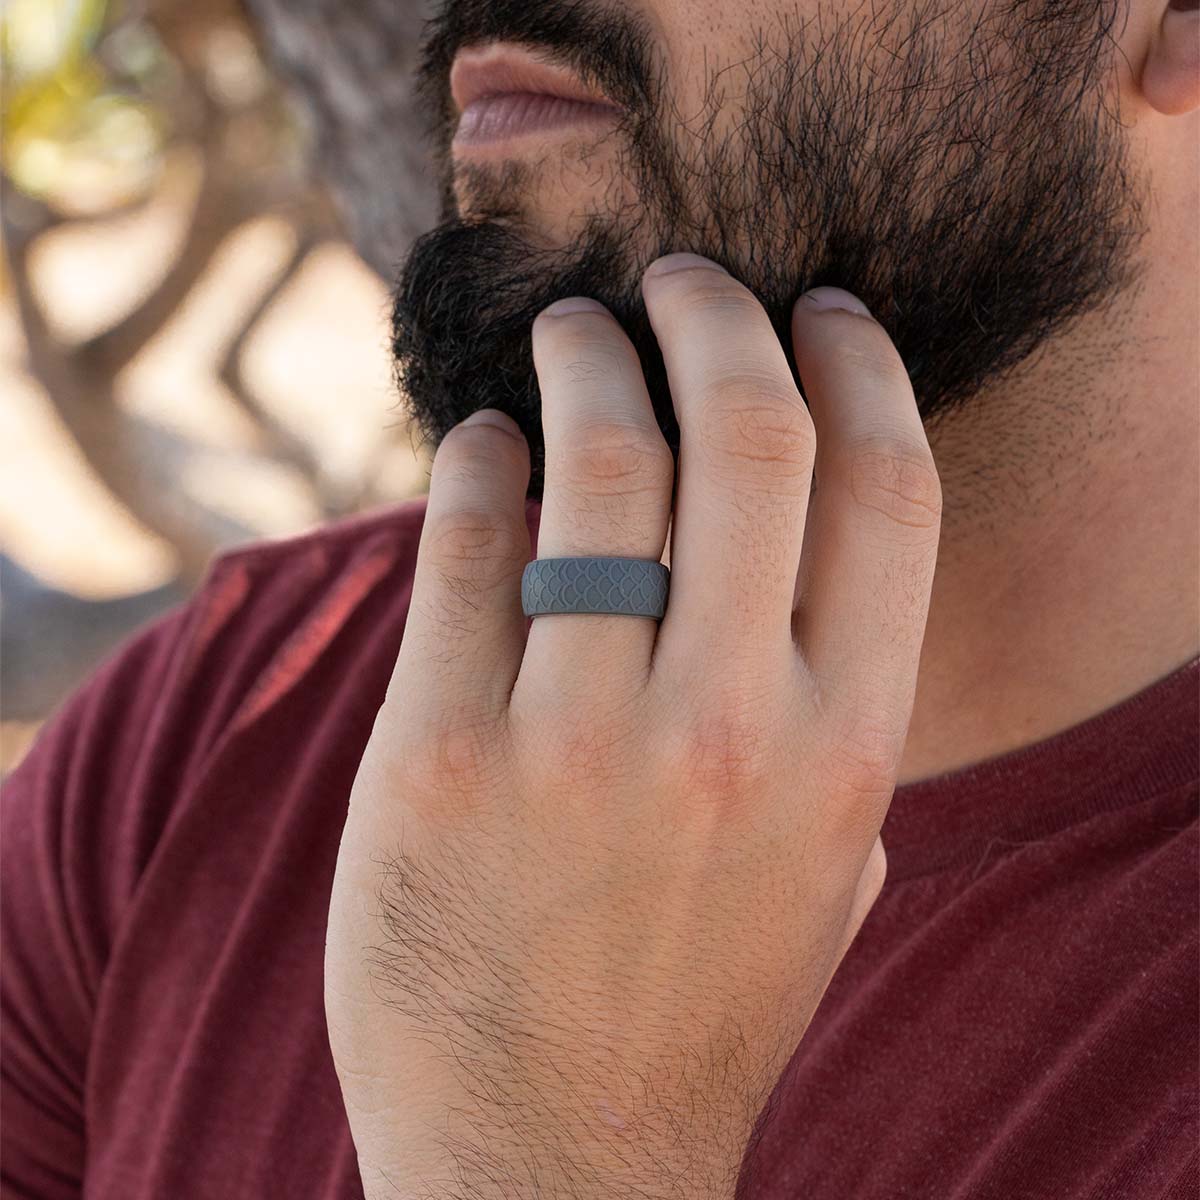 Male Hand wearing a unique gray rubber wedding ring